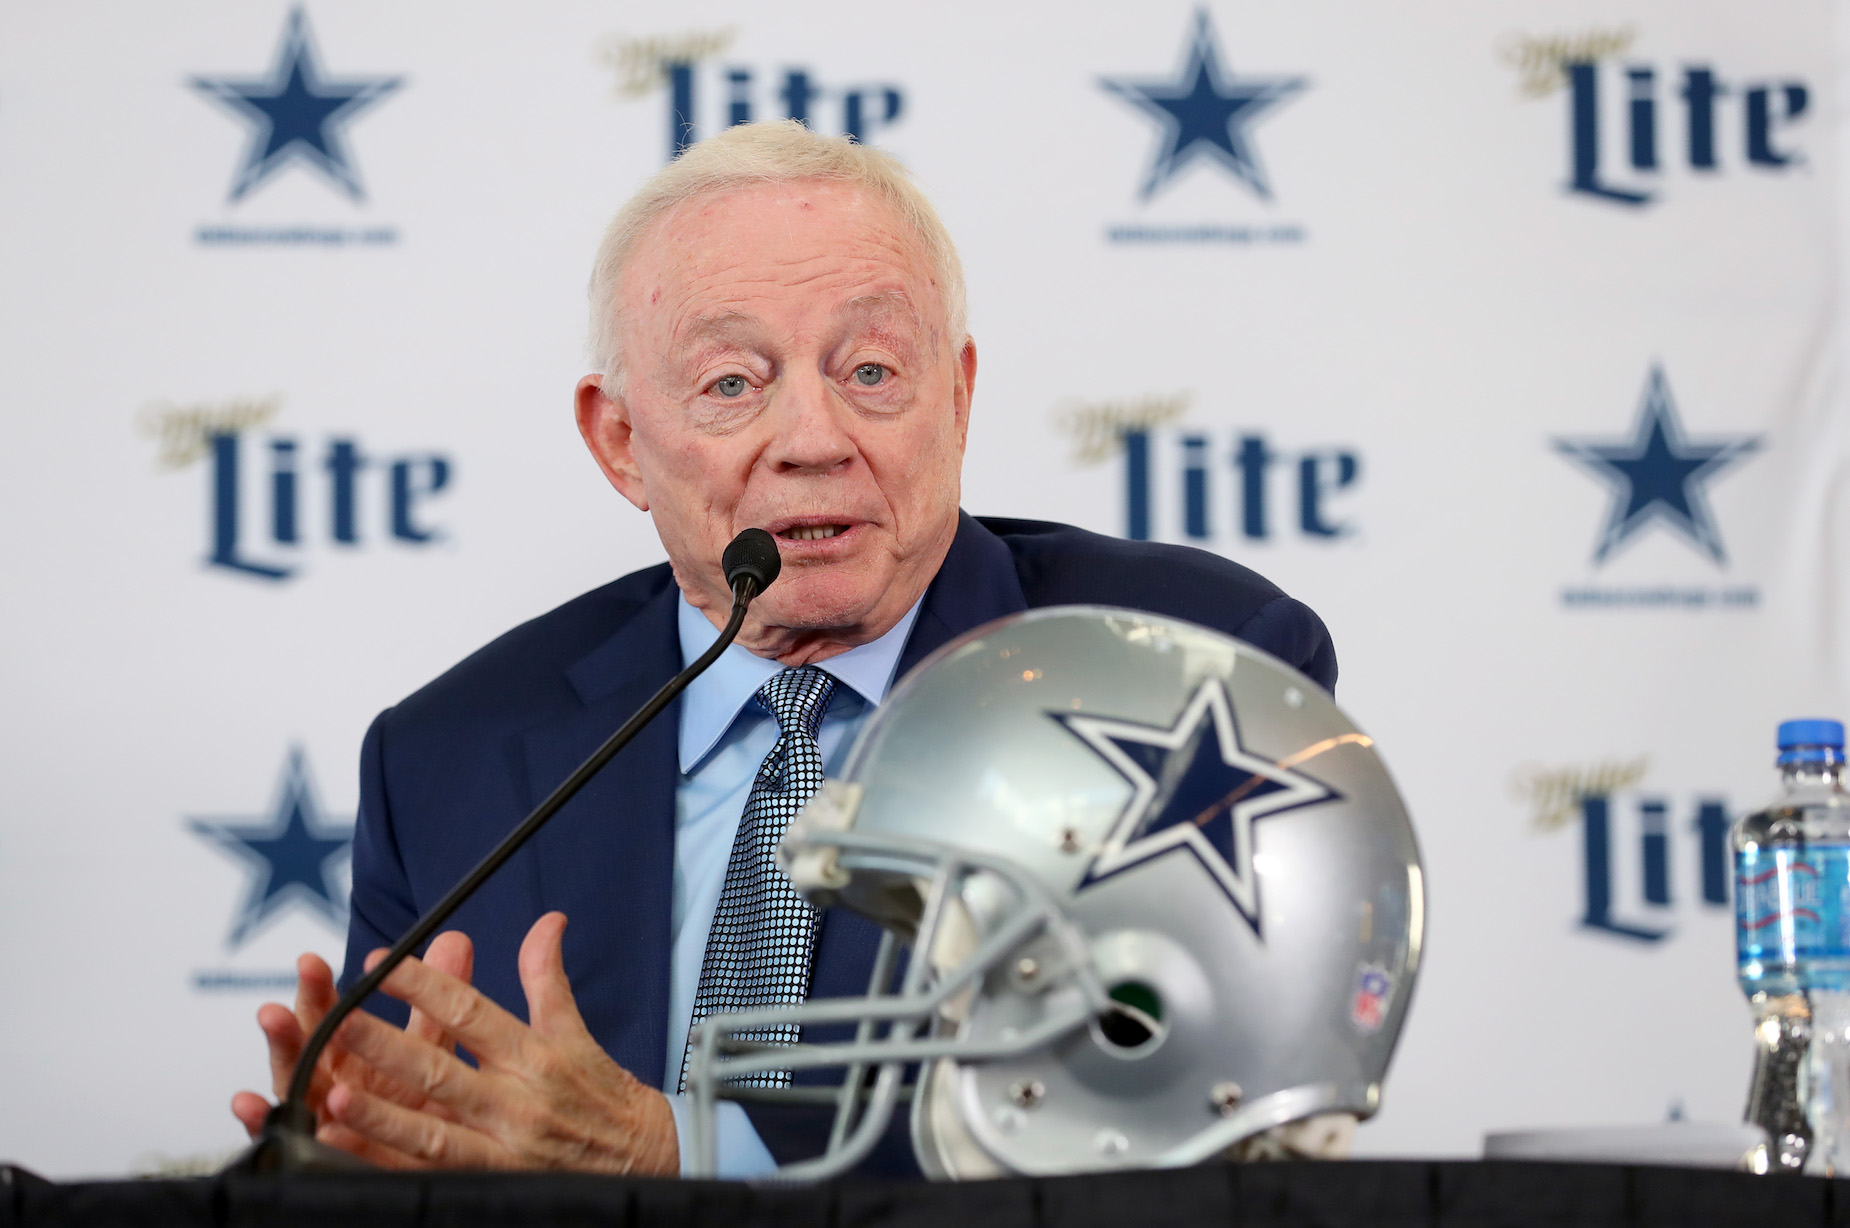 Dallas Cowboys owner Jerry Jones isn't done discussing national anthem protests just yet.